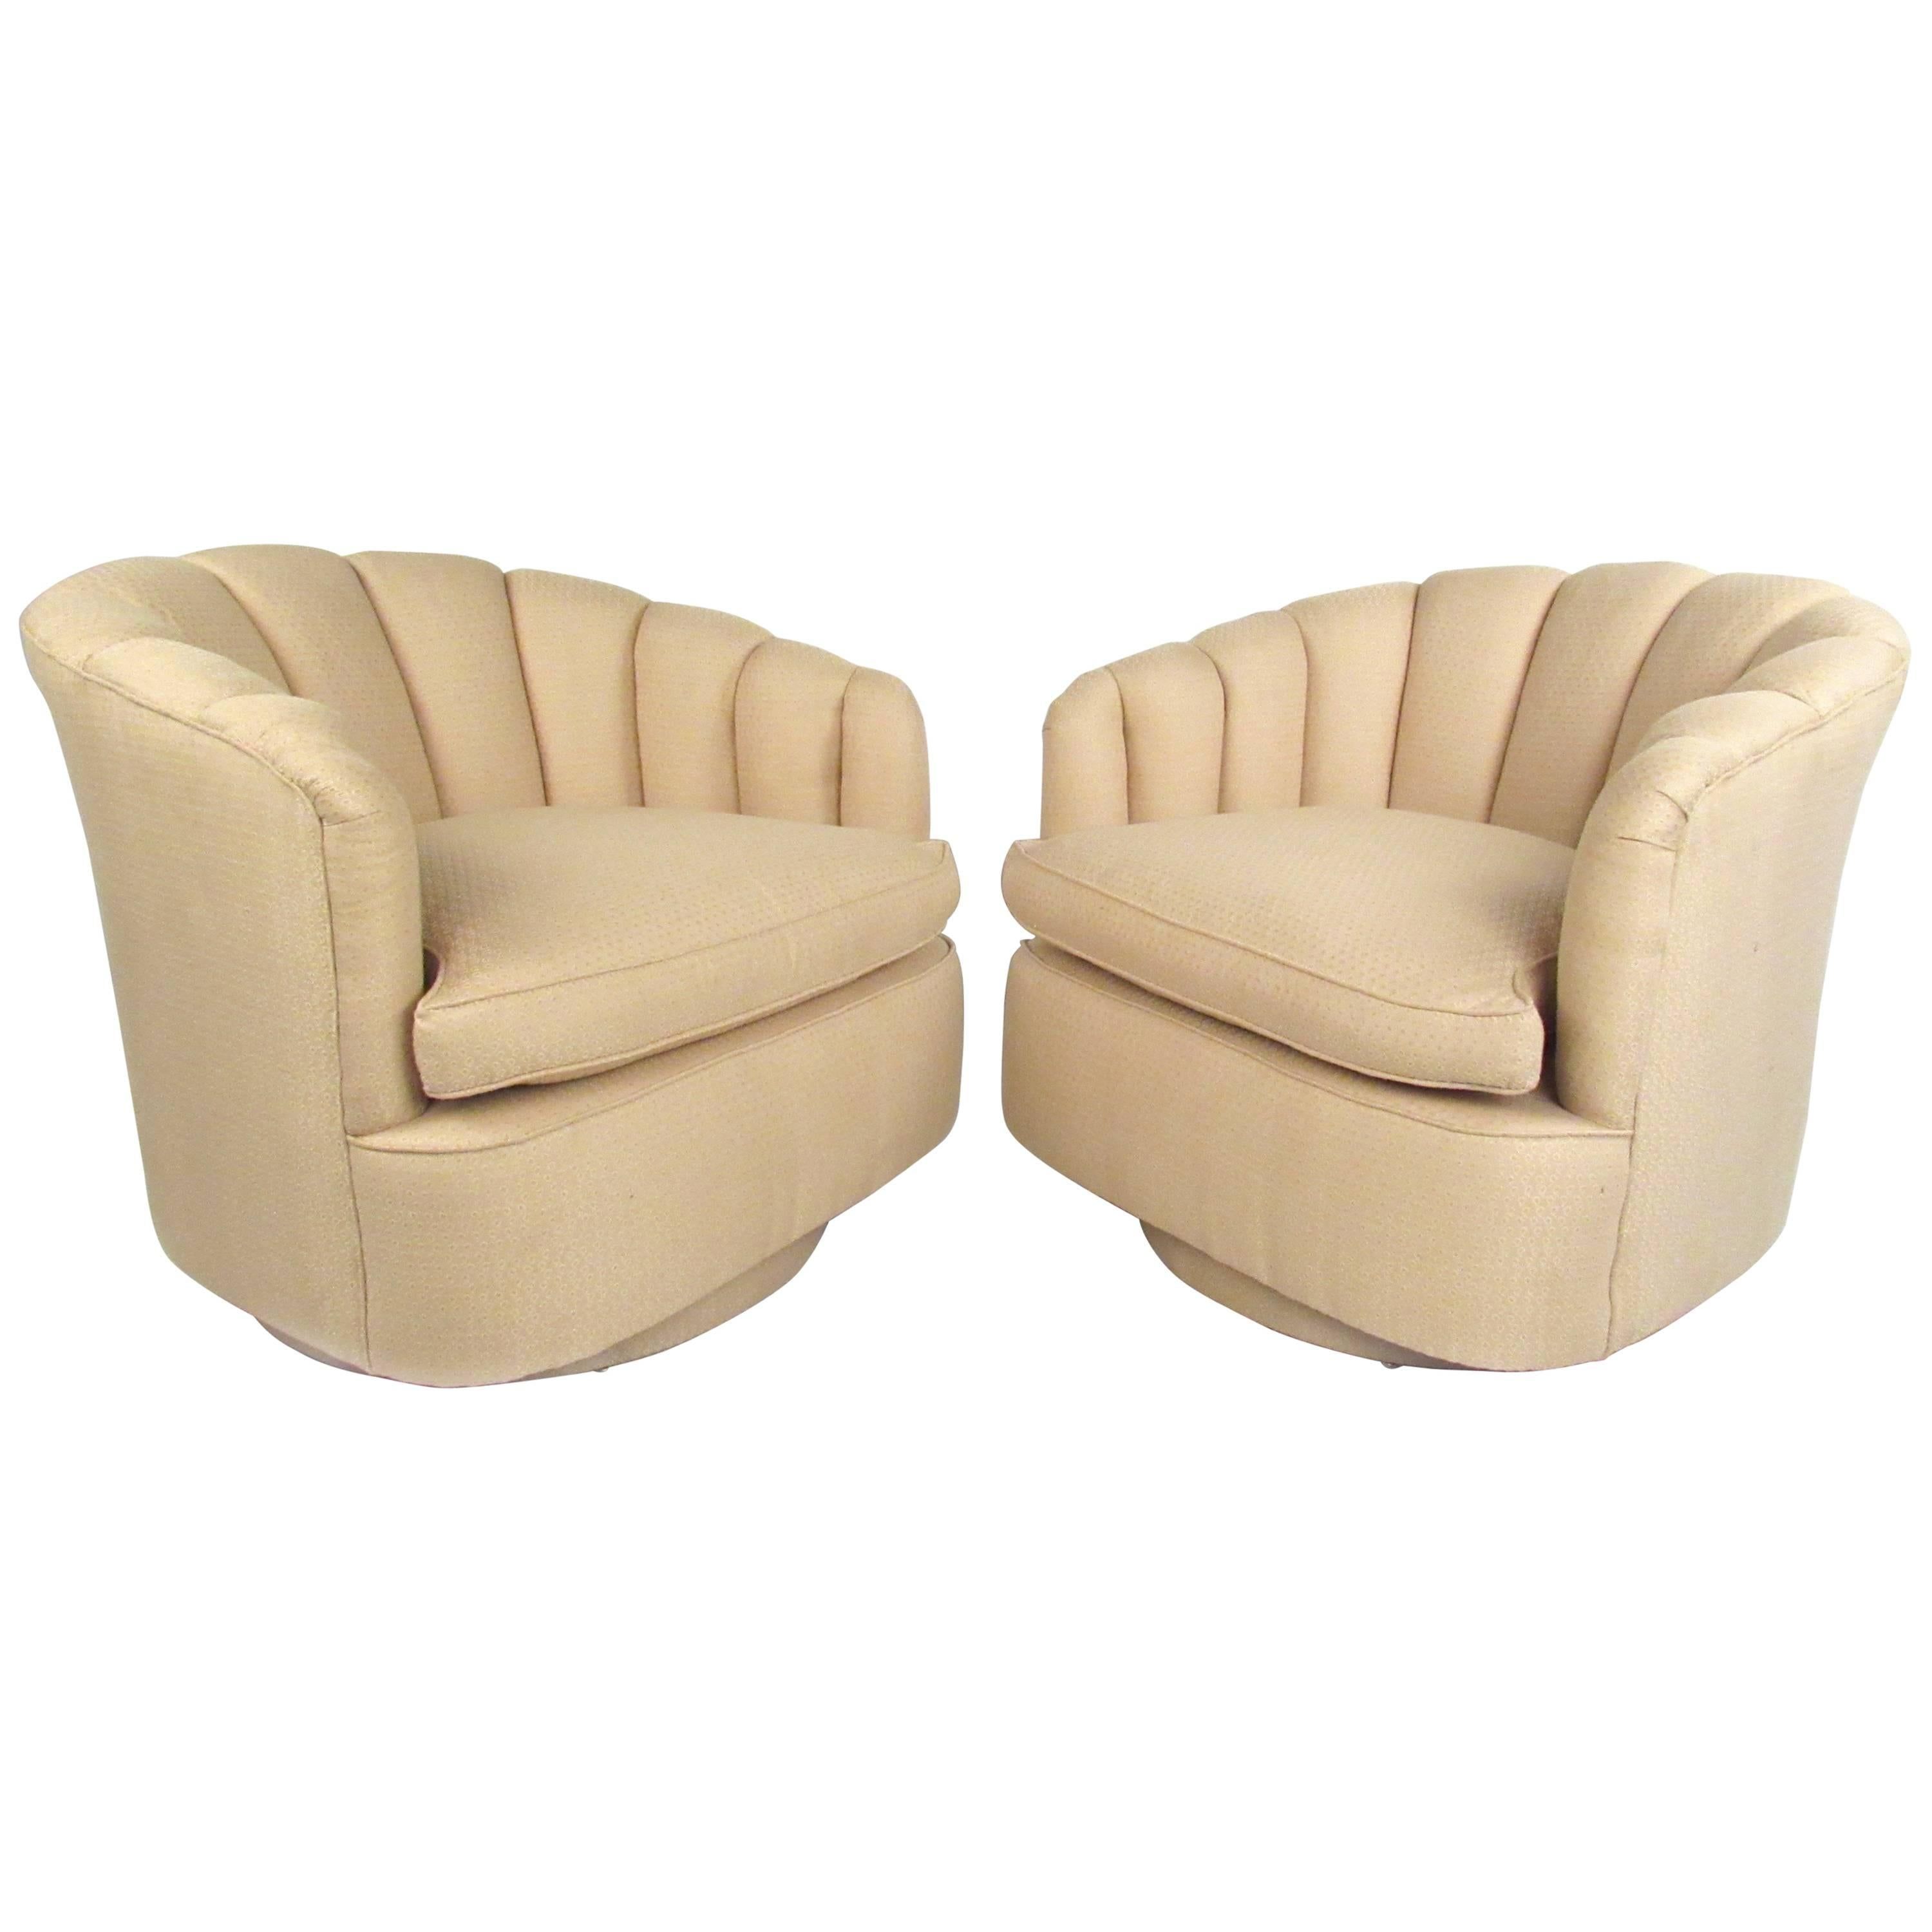 Pair of Contemporary Modern Scalloped Swivel Lounge Chairs | 1stDibs